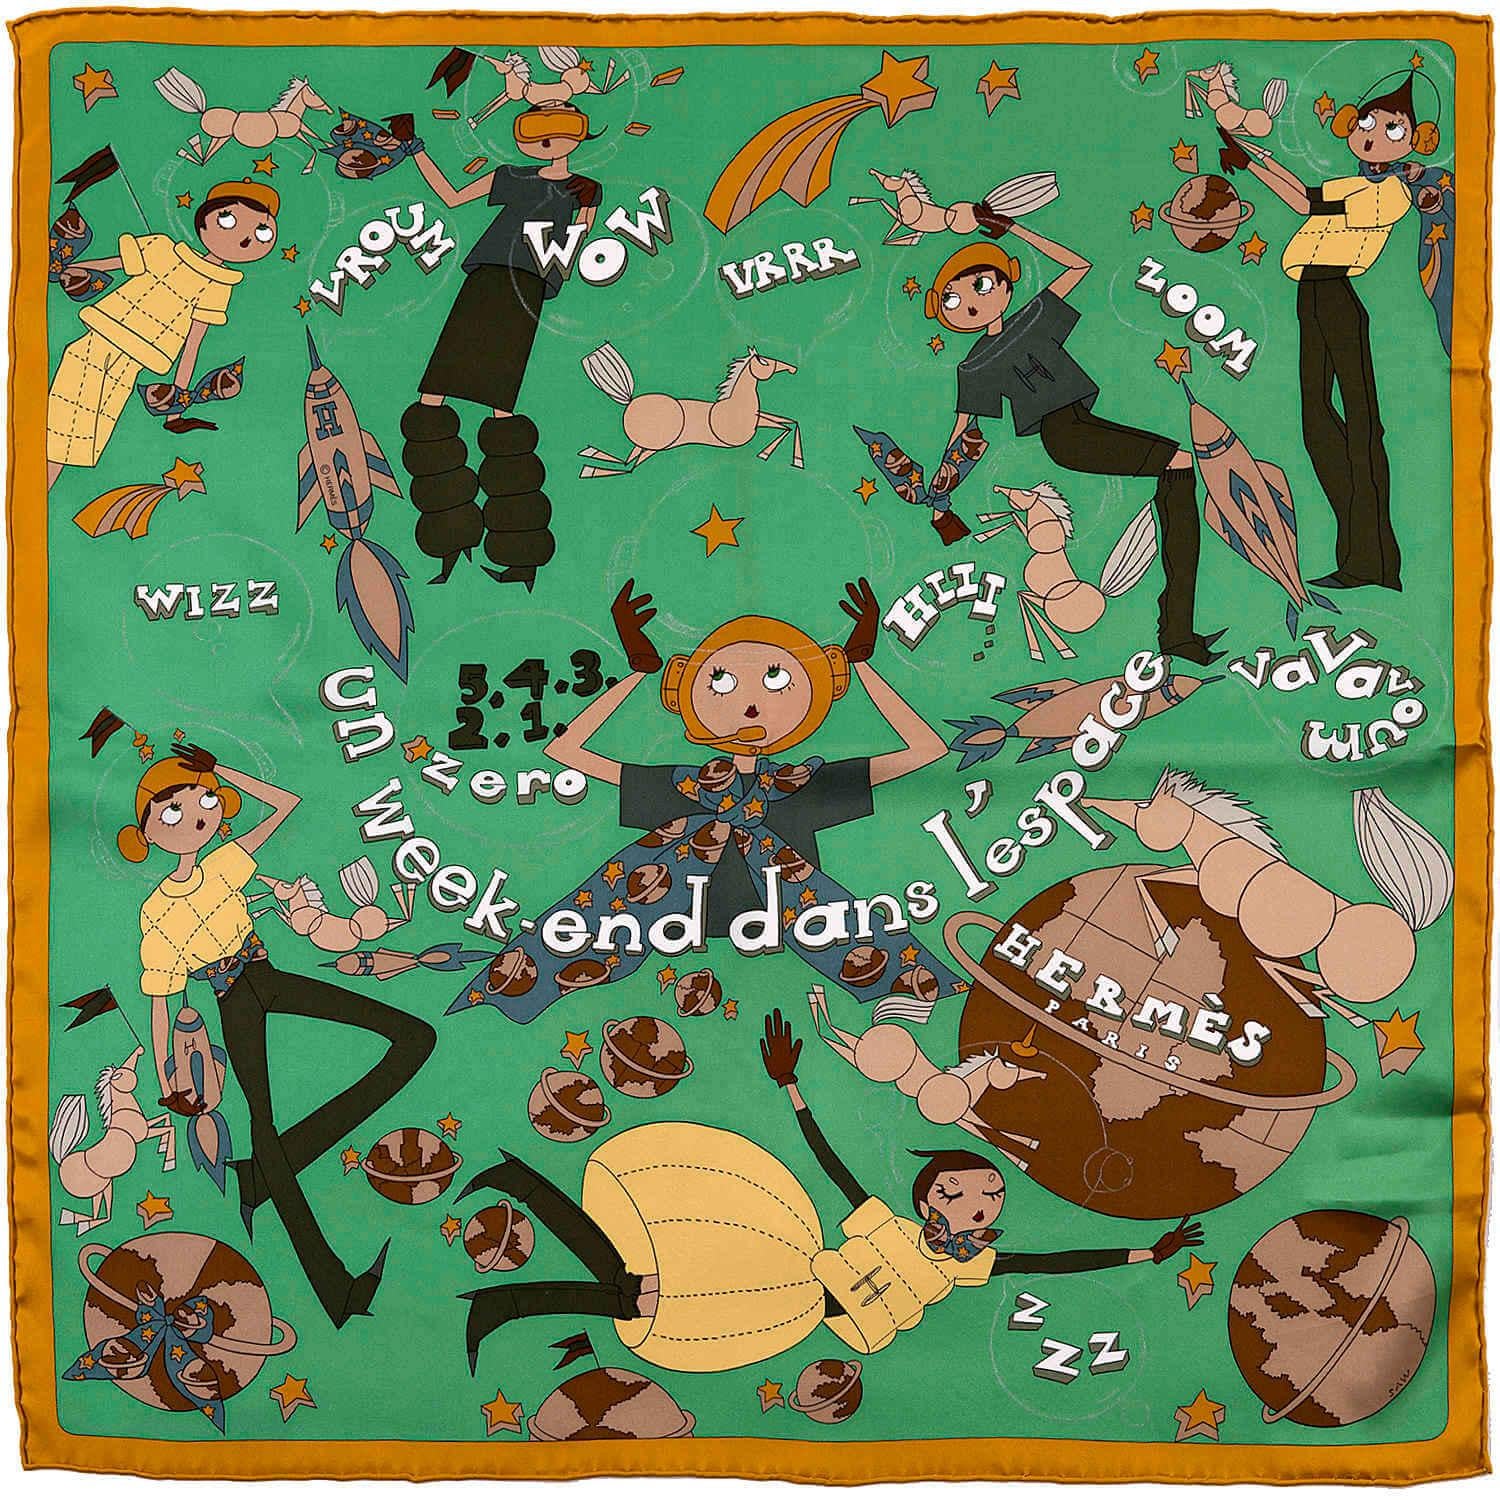 An unusual and rare Hermes silk scarf, 'Un week-end dans l'espace' by Hermes guest designer Saw Keng. The designer seems to have designed a scarf depicting a busy, fun weekend - depending, of course, on your point of view. The scarf is in absolutely